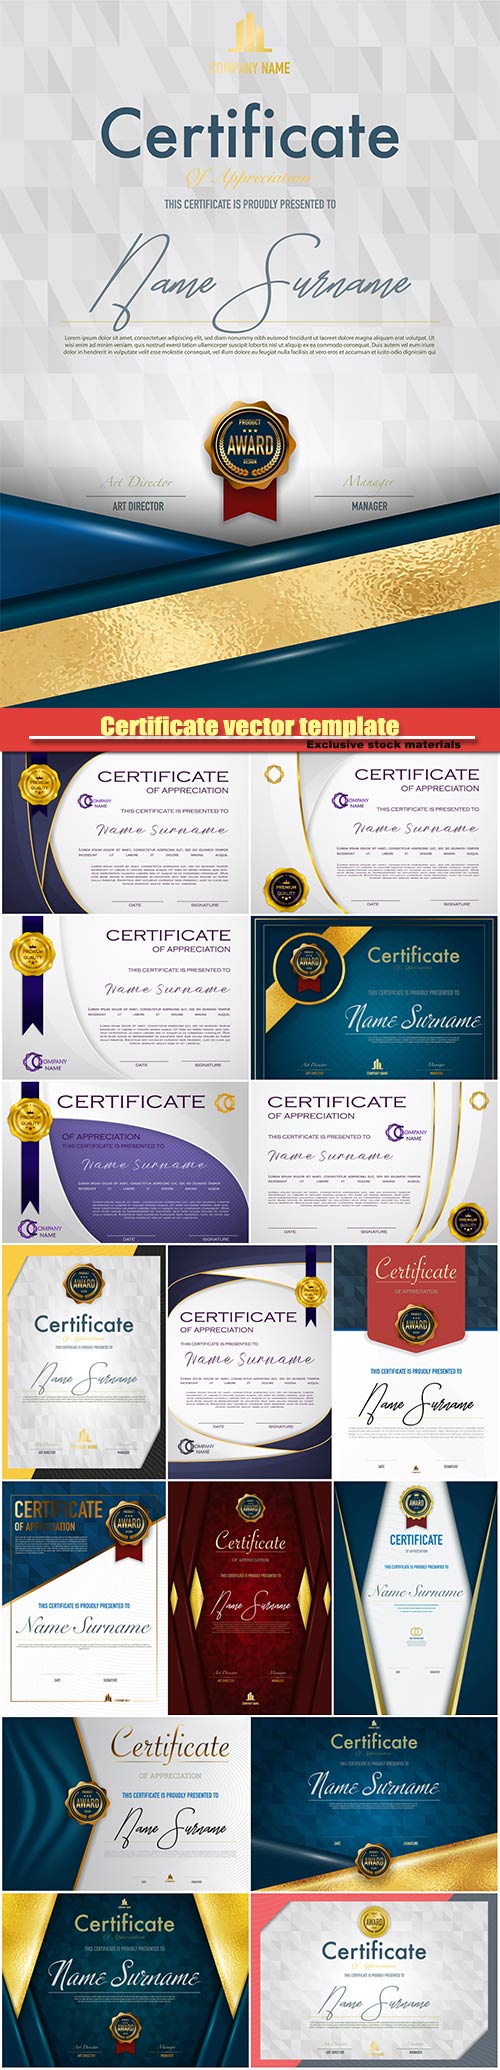 Certificate vector template luxury and diploma